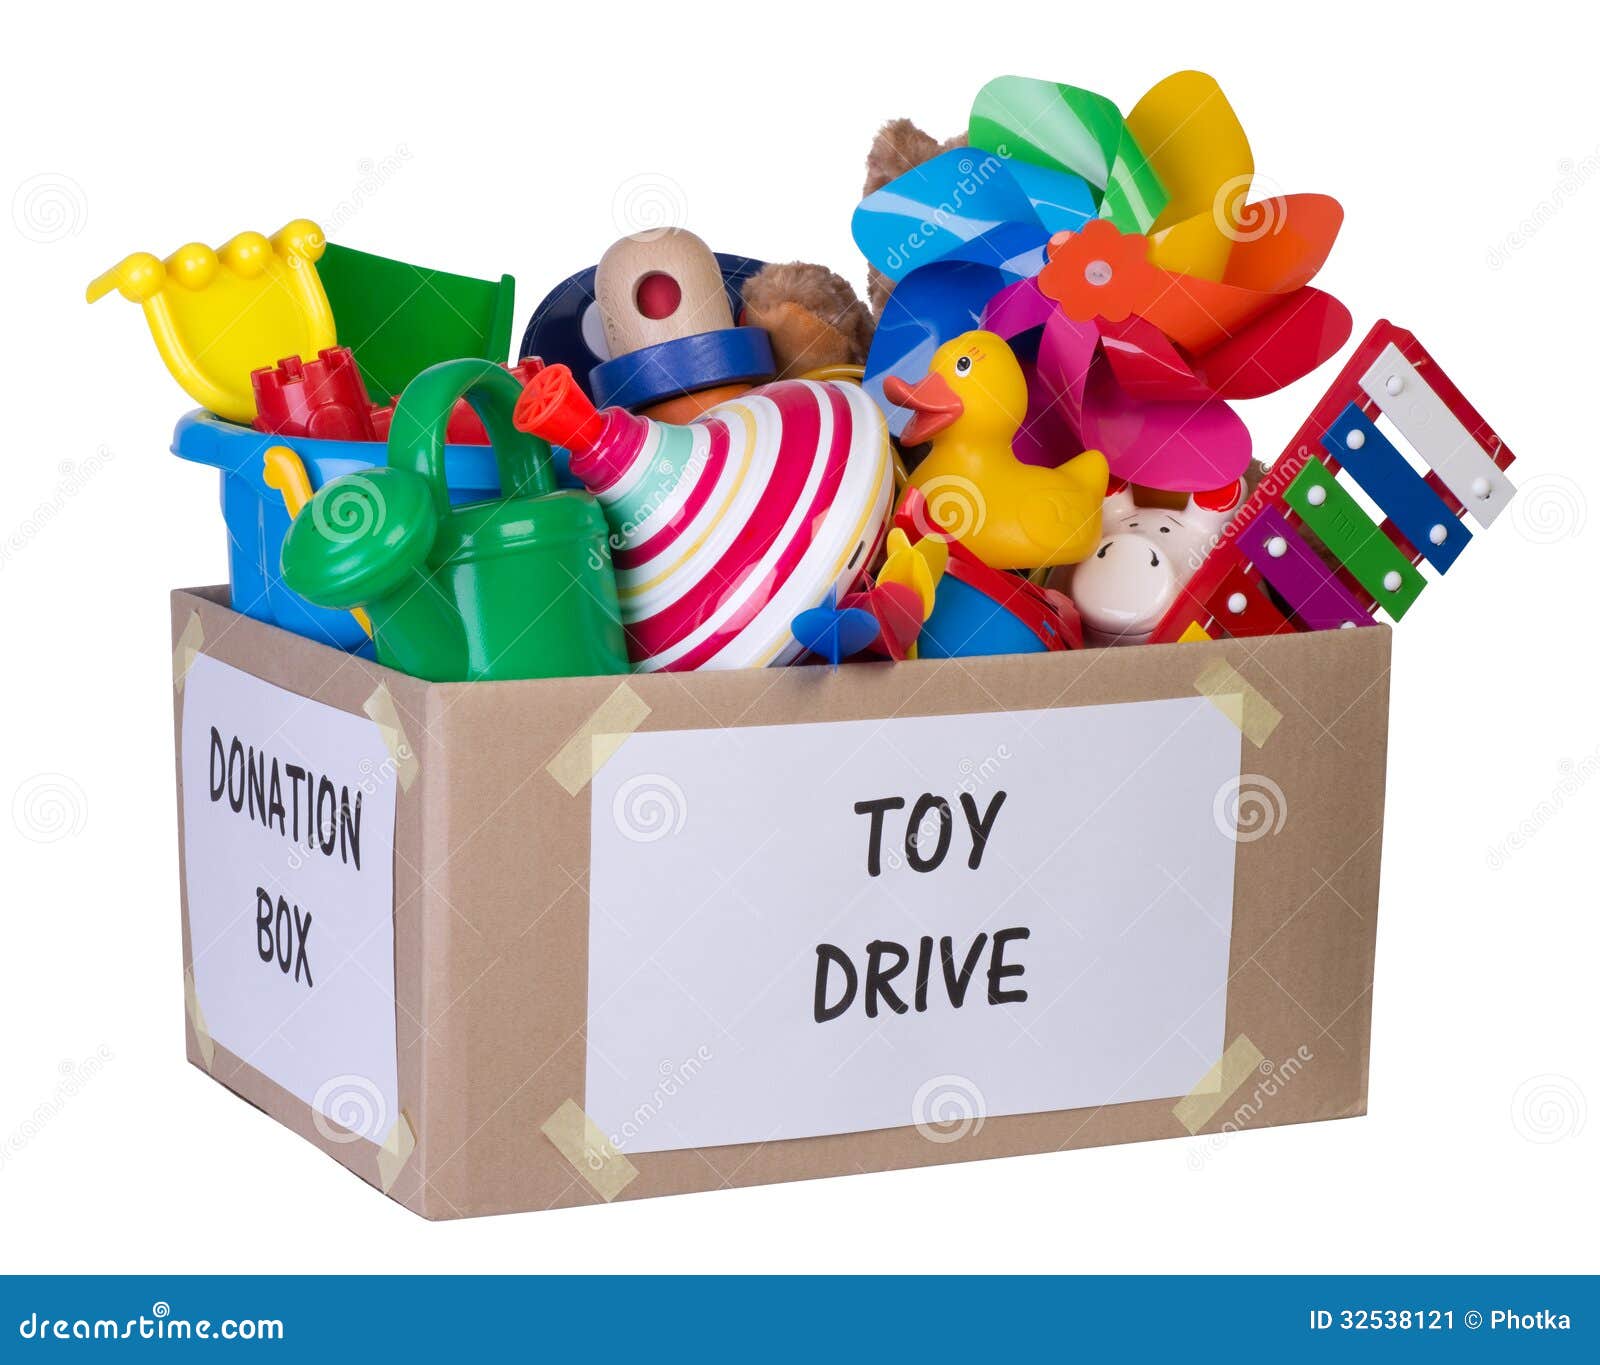 Donations Toys 4